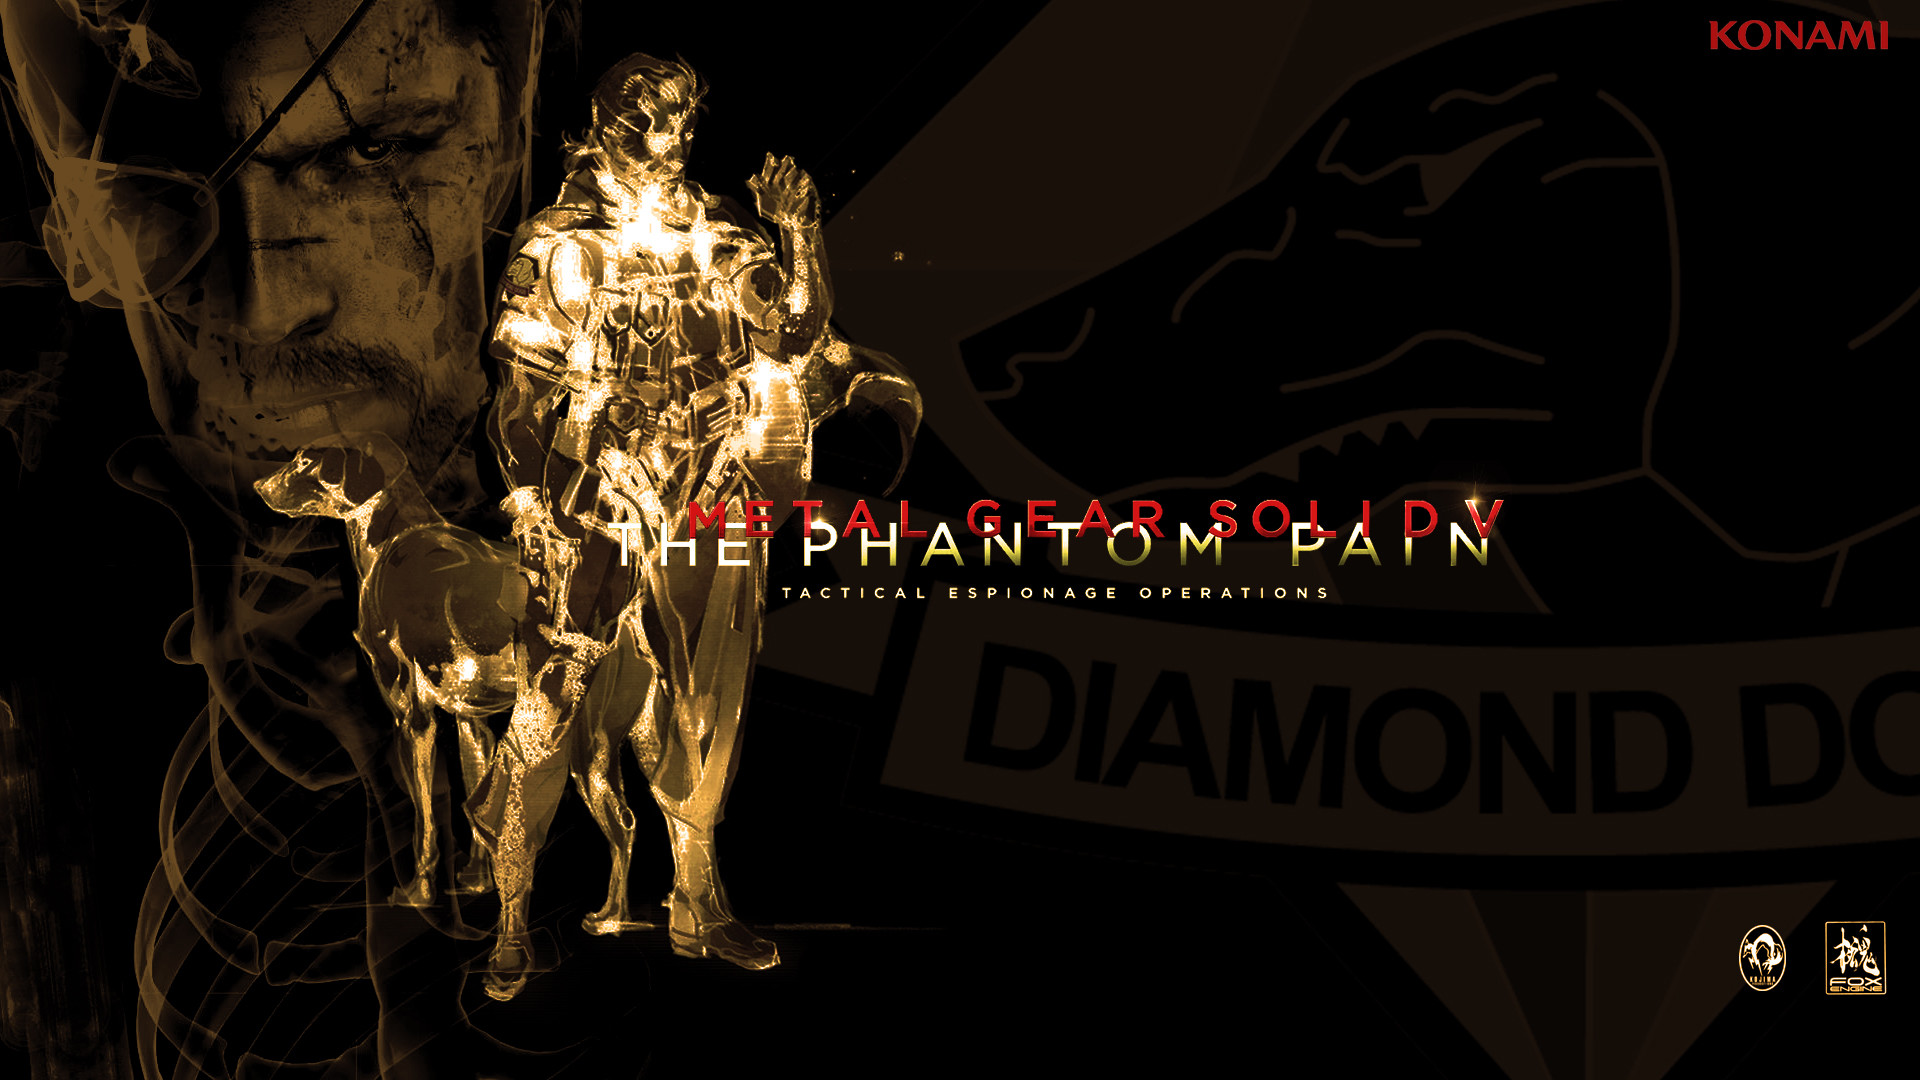 Heres a MGSV The Phantom Pain triple monitor wallpaper I made Adorable Wallpapers Pinterest Monitor, Wallpaper and Metal gear solid